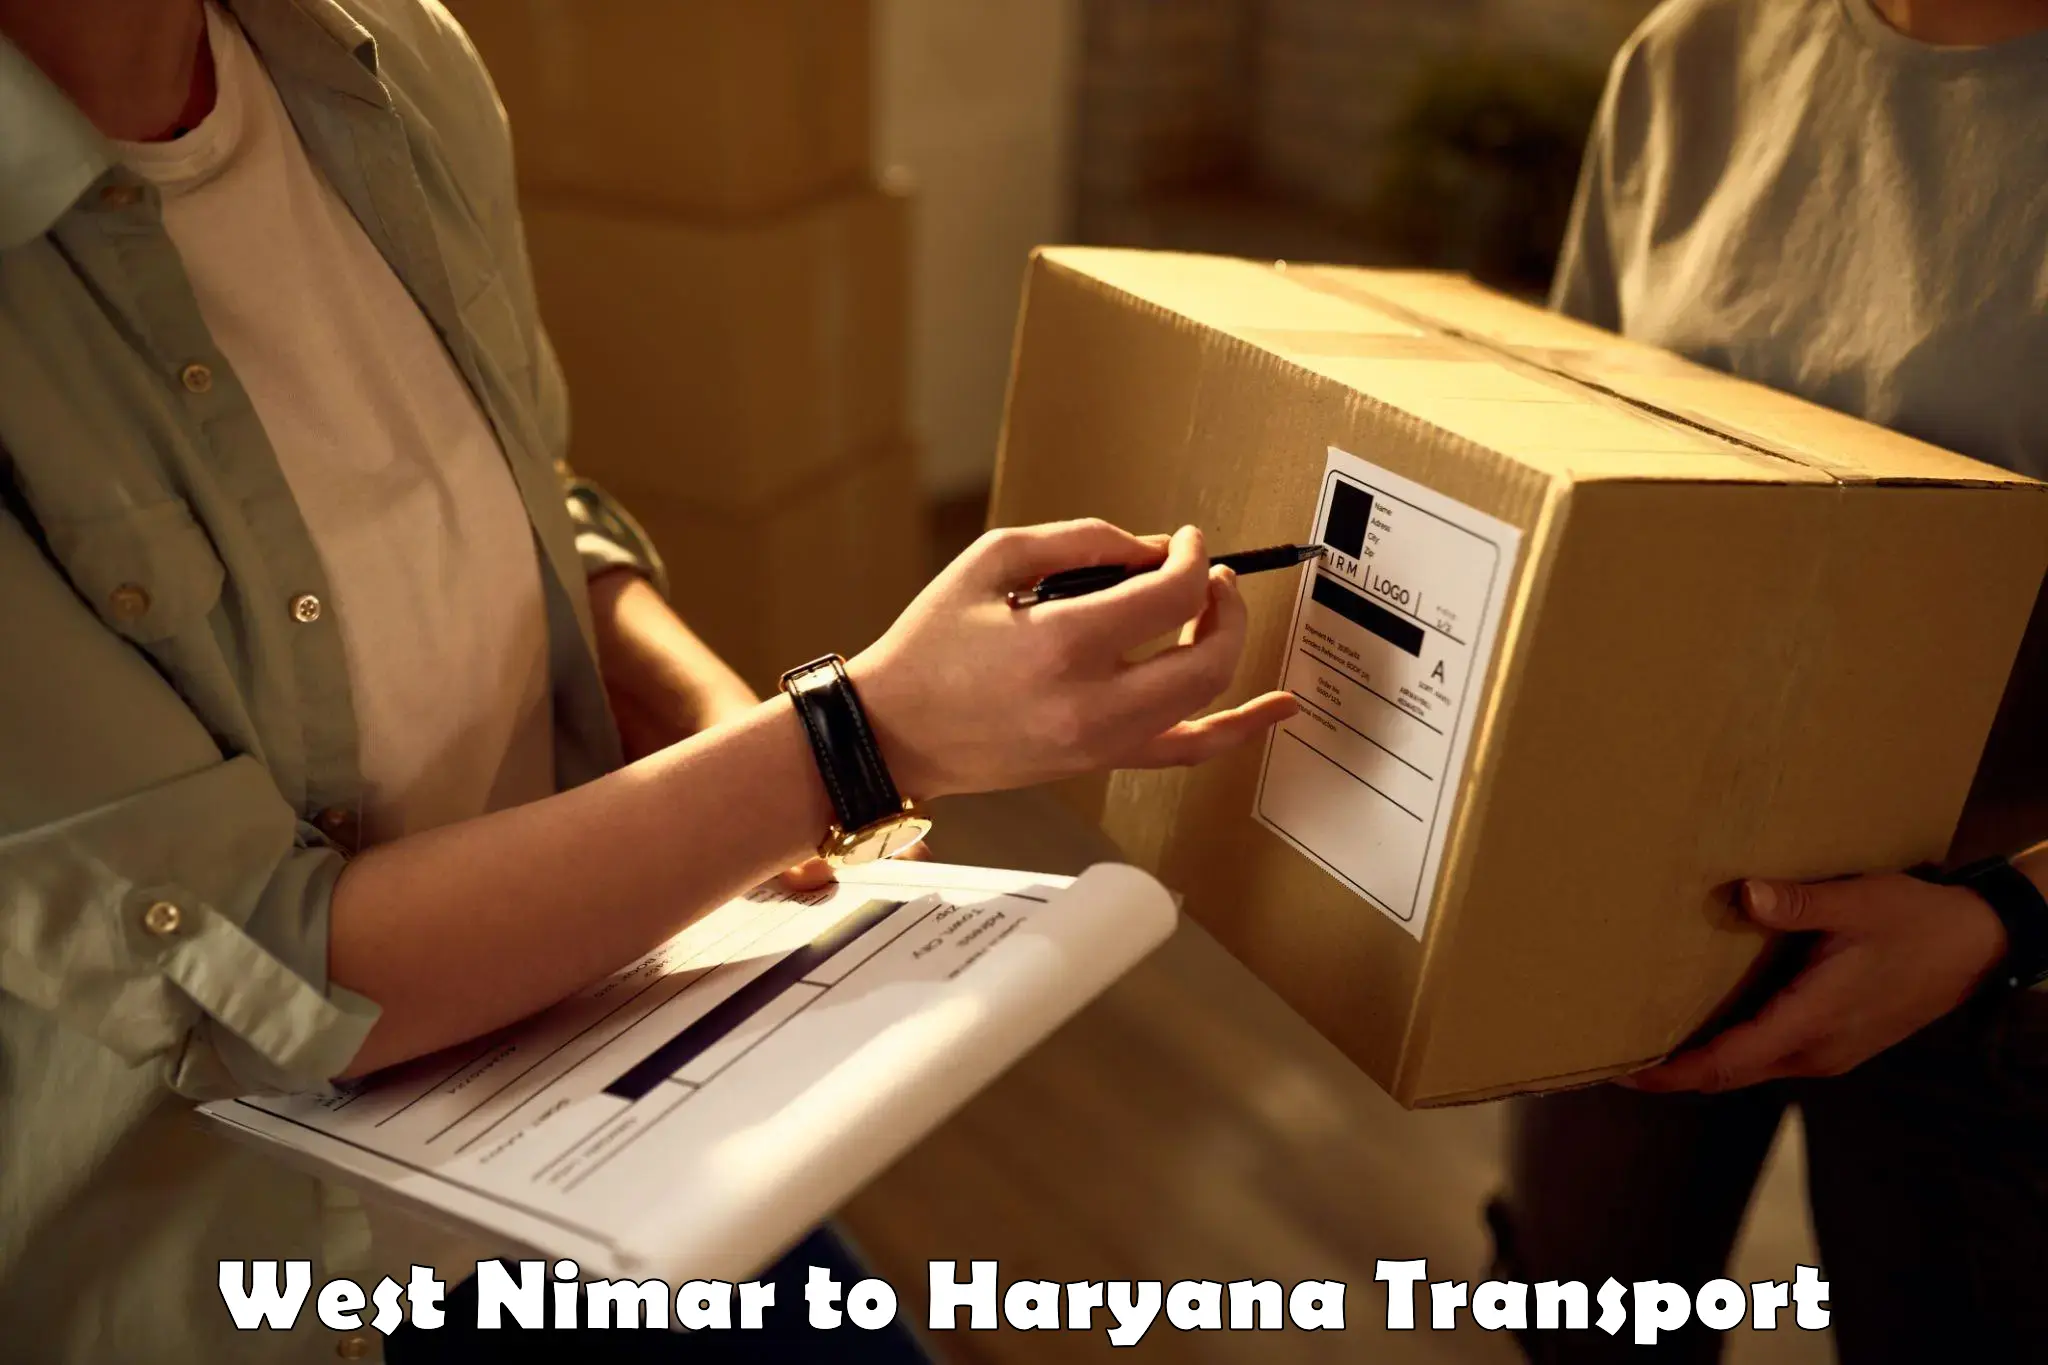 Nearby transport service West Nimar to Gurgaon